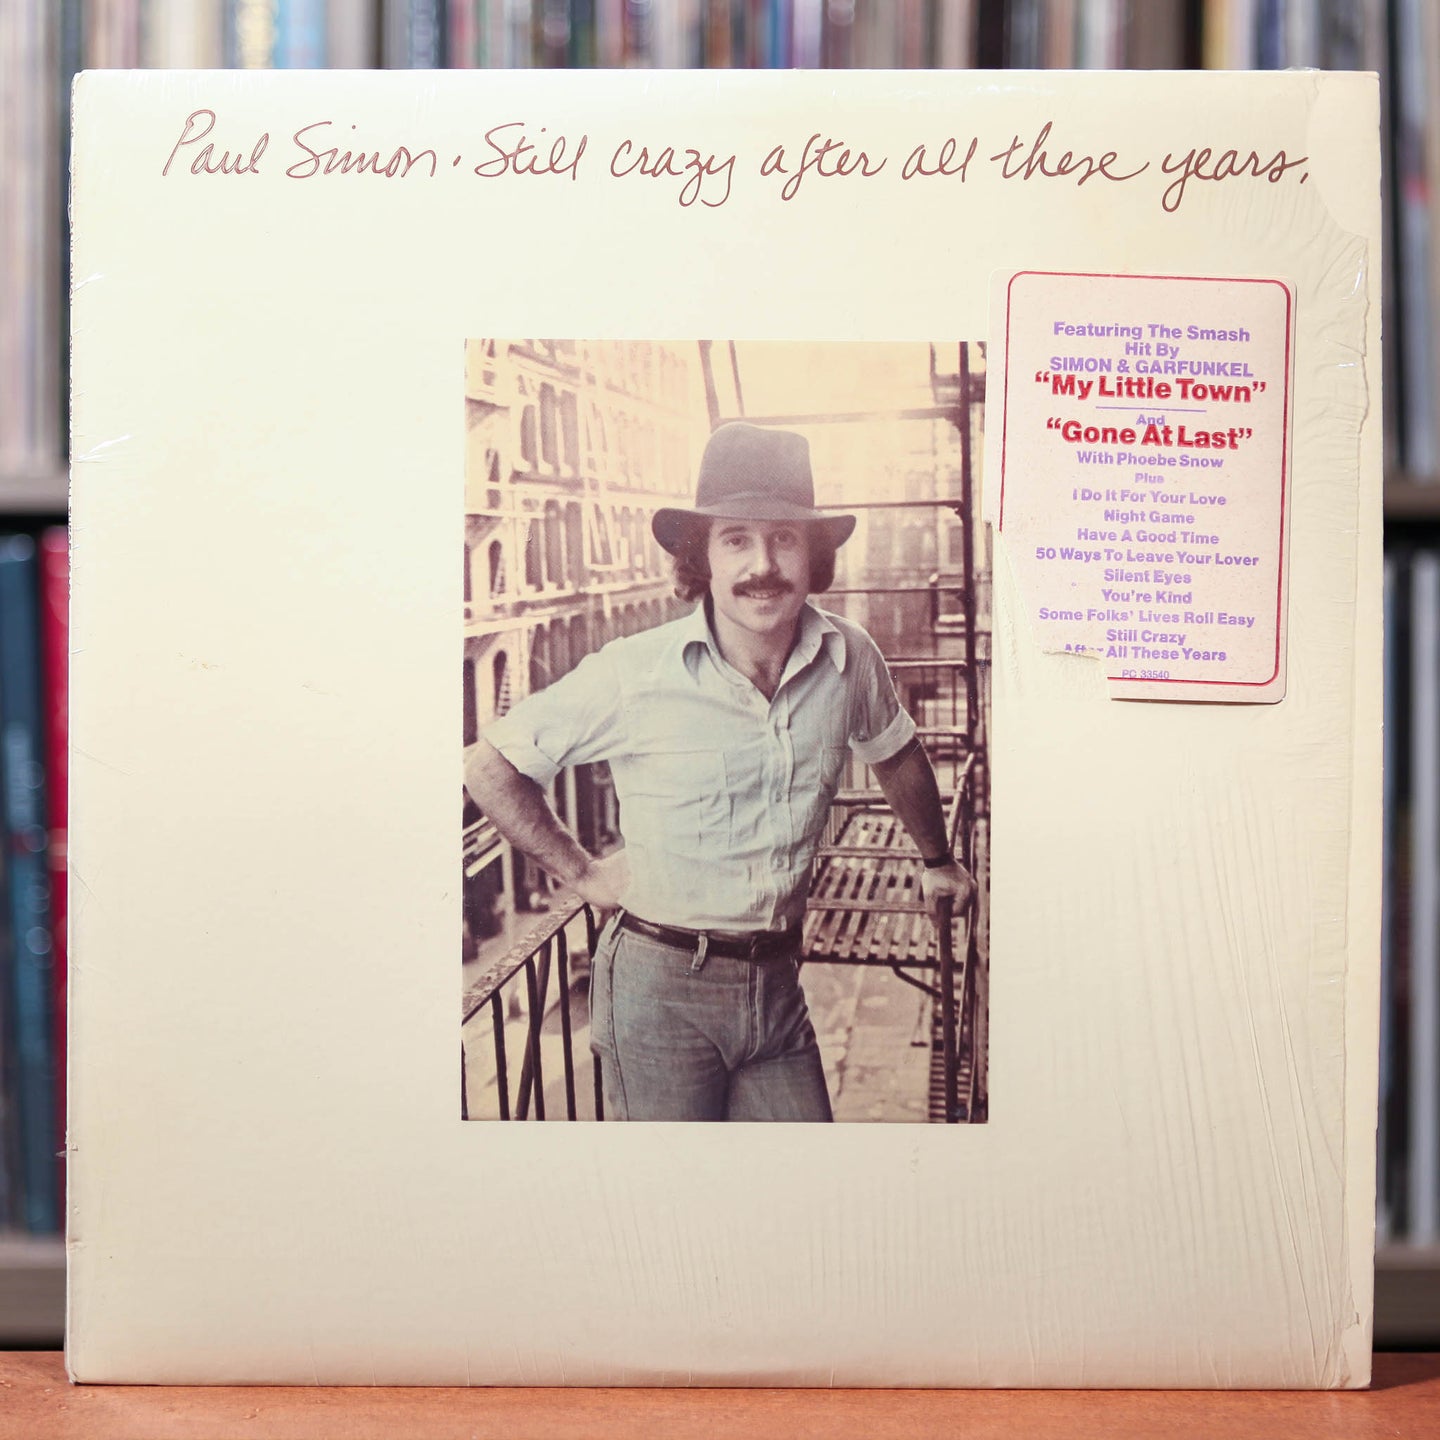 Paul Simon - Still Crazy After All These Years - Rare PROMO - CBS 1975, VG++/VG+ w/Shrink and Hype